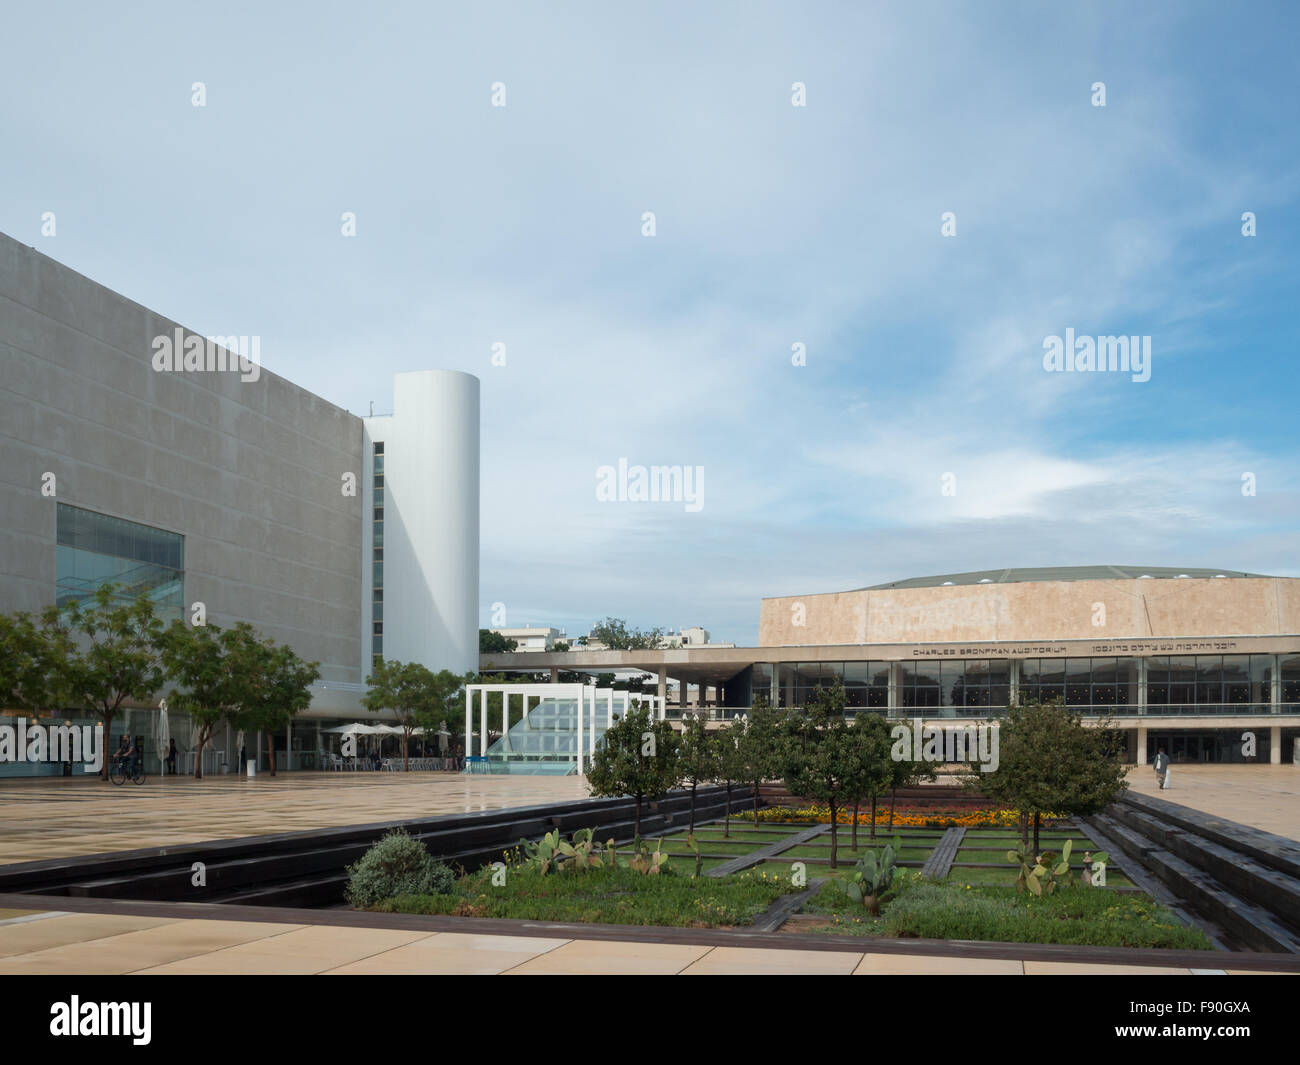 Tel Aviv Habima Square with Hall of Culture and Habima National Theater Stock Photo